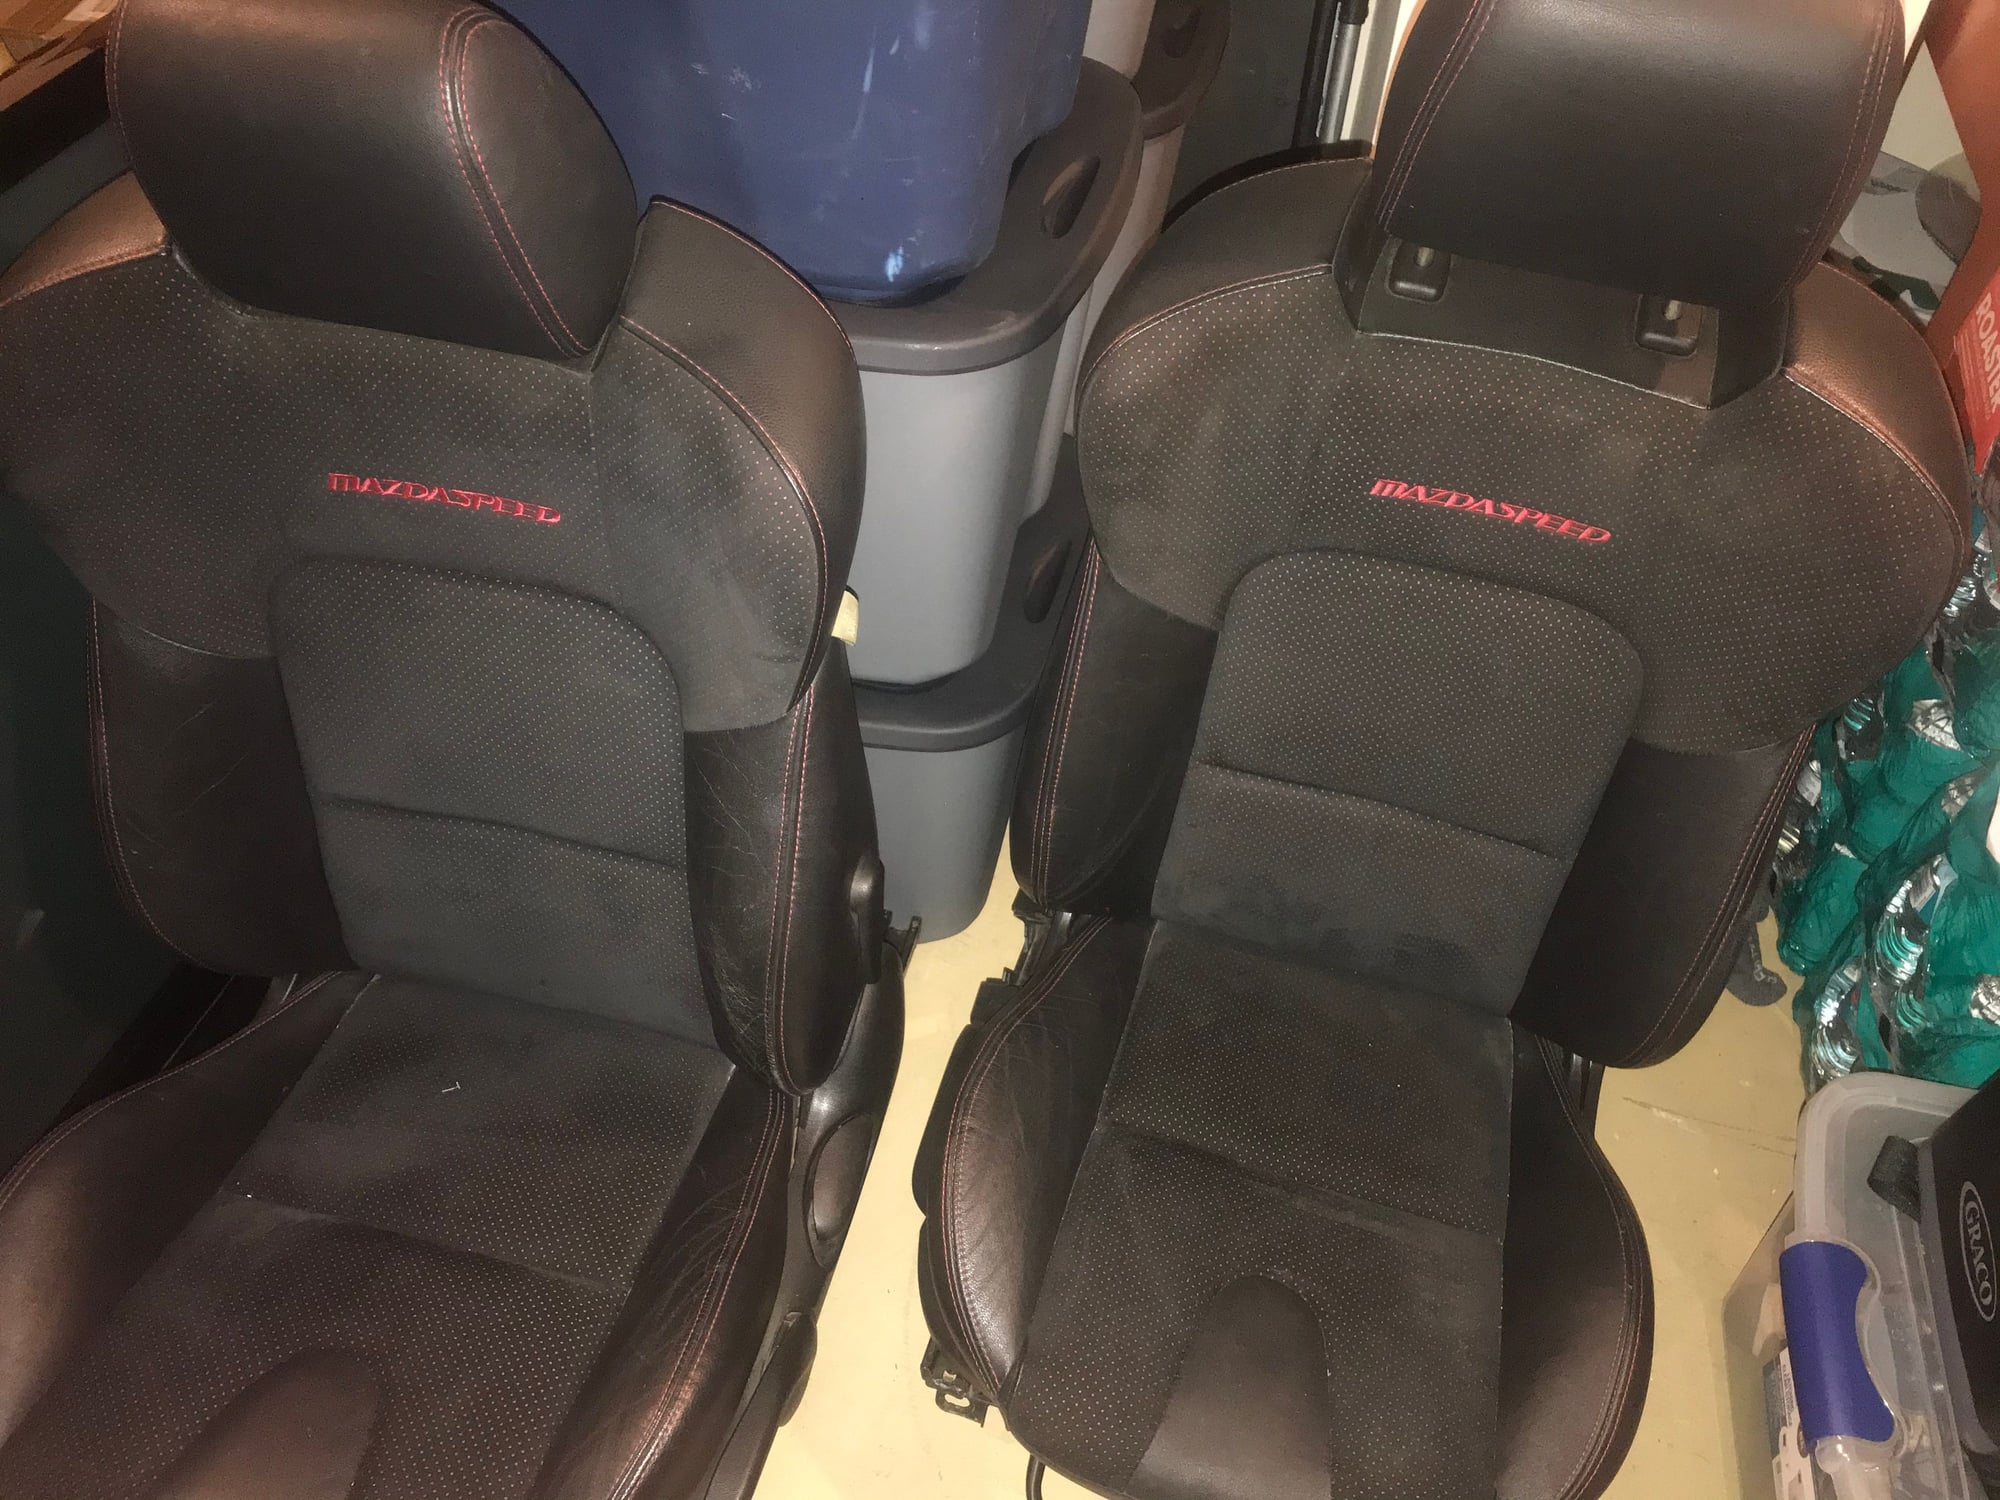 Interior/Upholstery - Mazdaspeed 3 seats with fc rails. - Used - 1986 to 1991 Mazda RX-7 - 2004 Mazda 3 - Saint Louis, MO 63114, United States